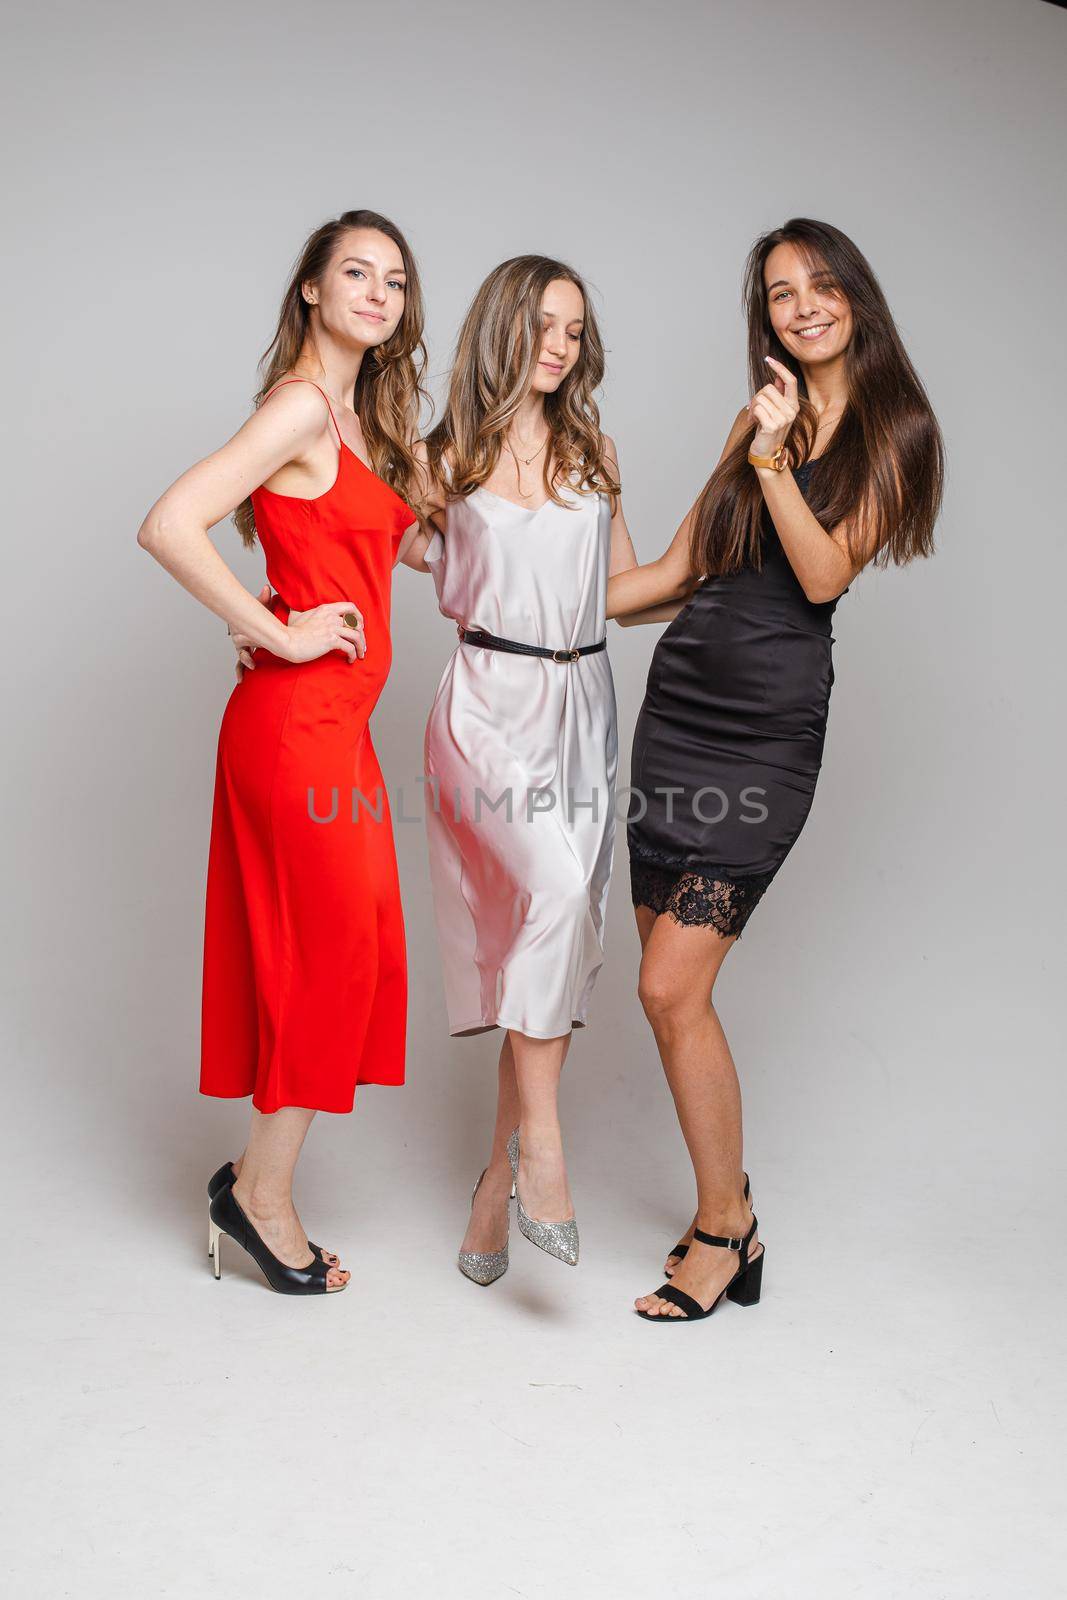 Charming positive young girls friends wearing stylish feminine evening dresses posing on gray studio background by StudioLucky